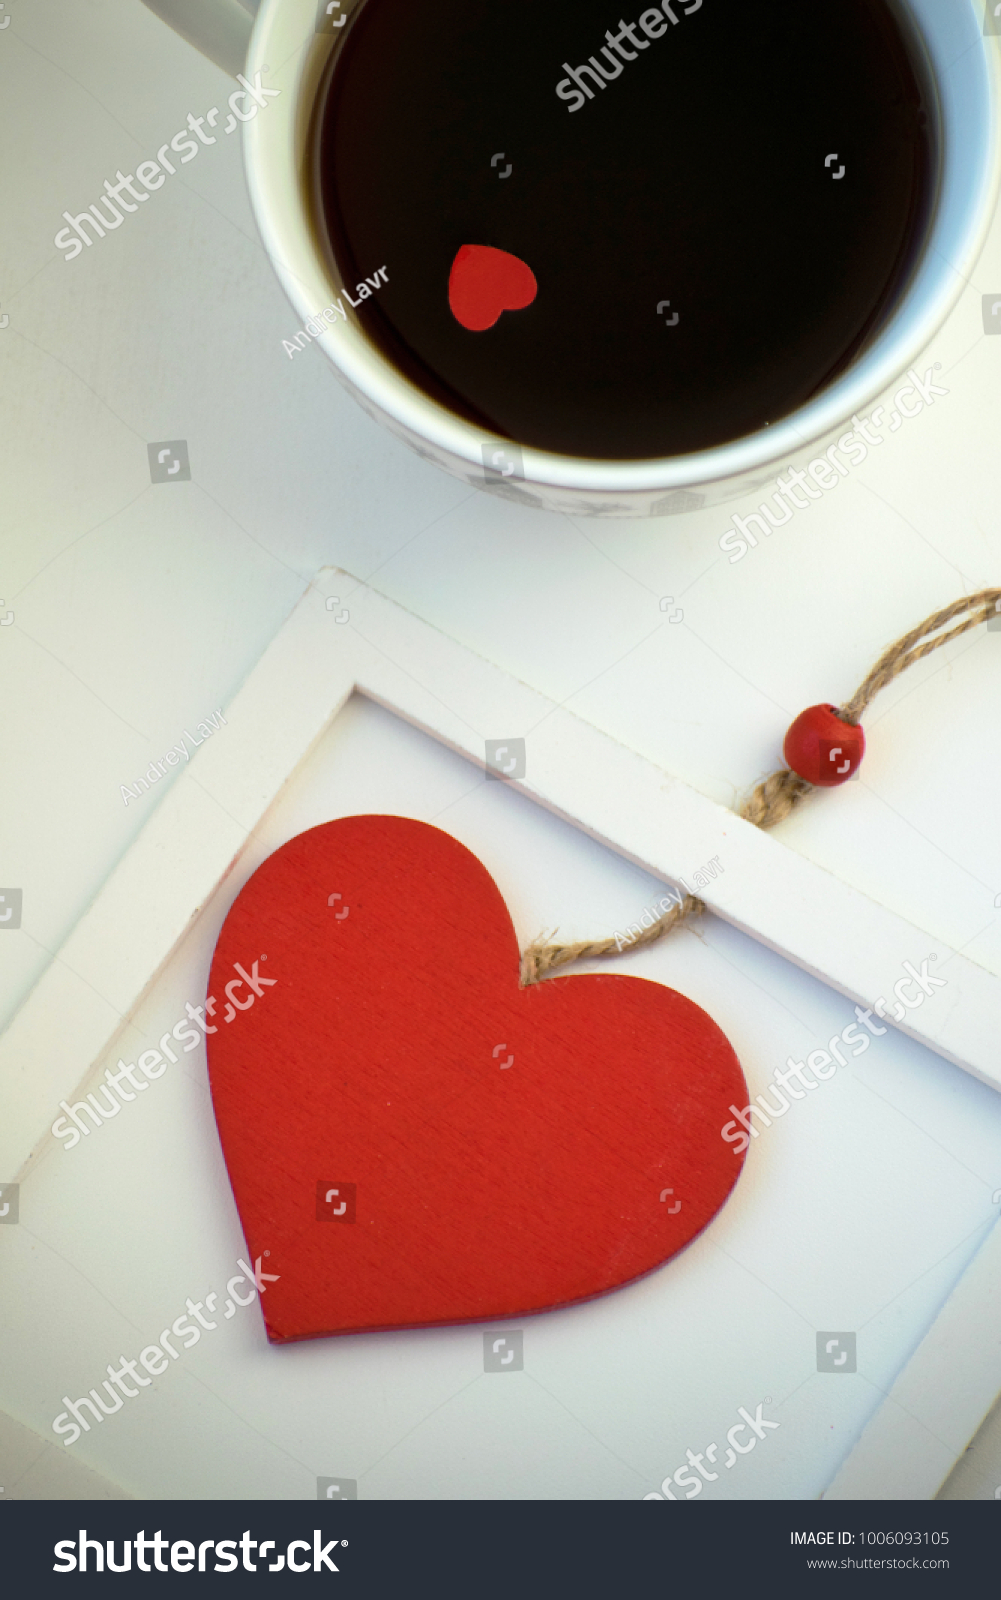 Cup of love, coffee with red heart. Red heart on a rope in the wooden frame. Valentine's day. Morning. The 14th of February. #1006093105